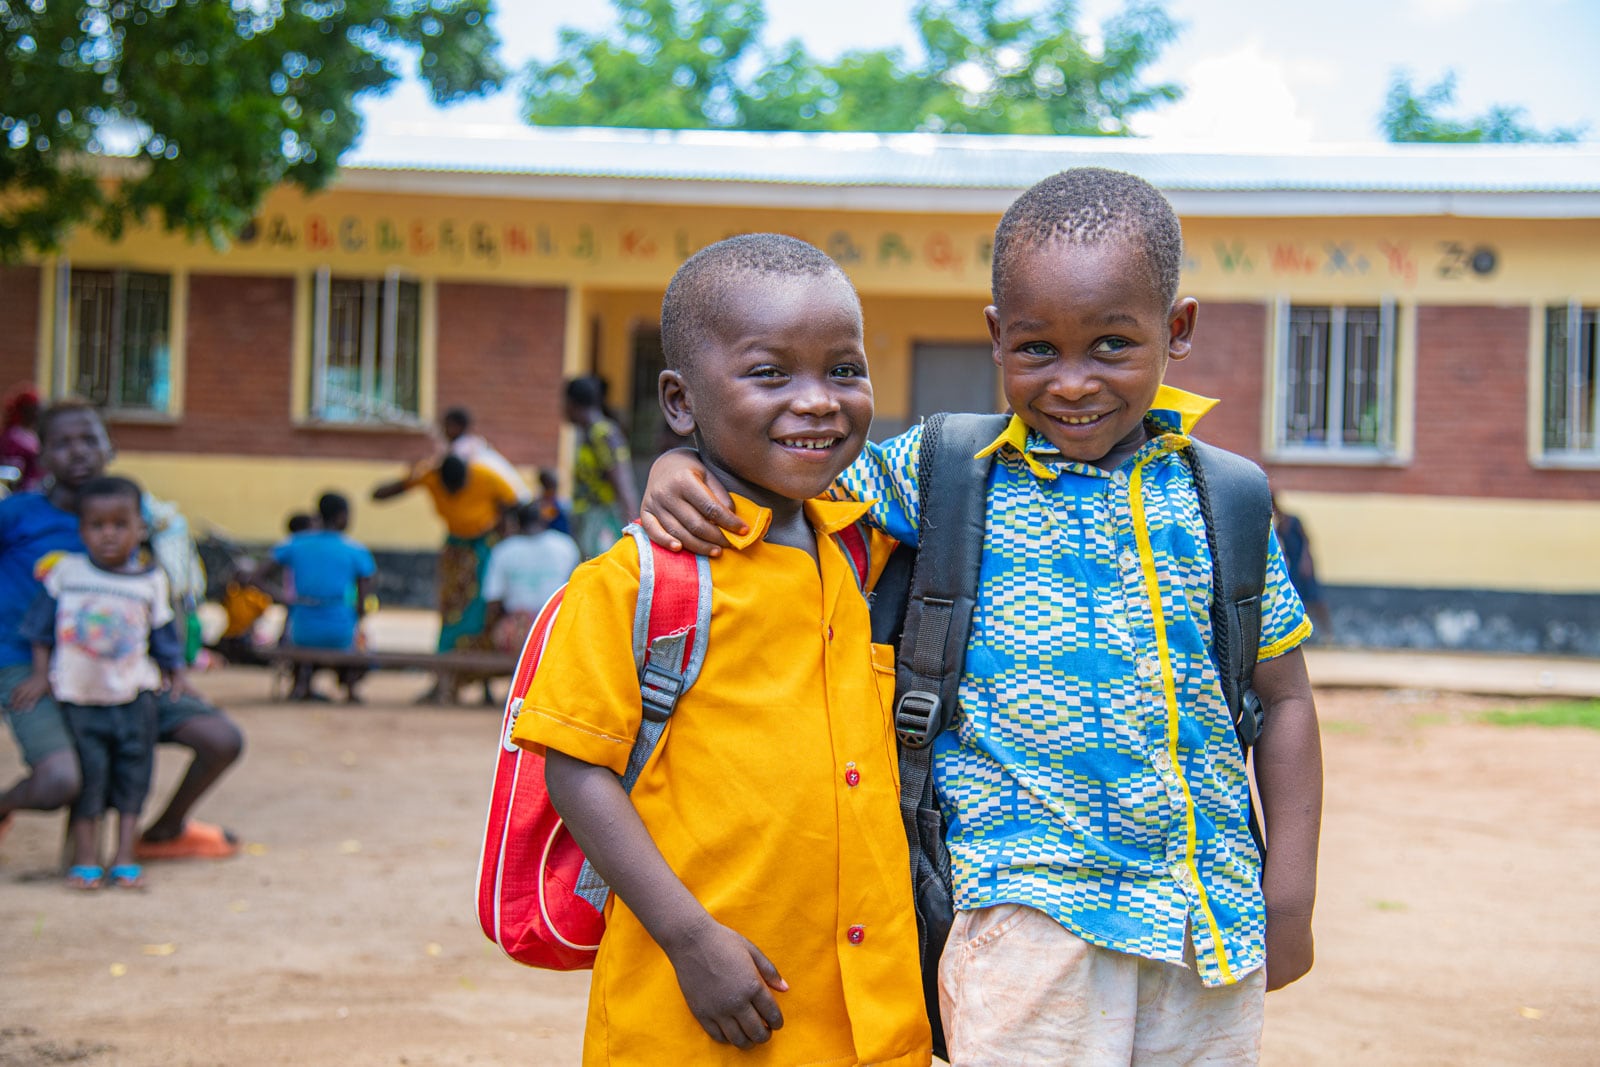 Two boys standing outside the early childhood development center posing for a picture.